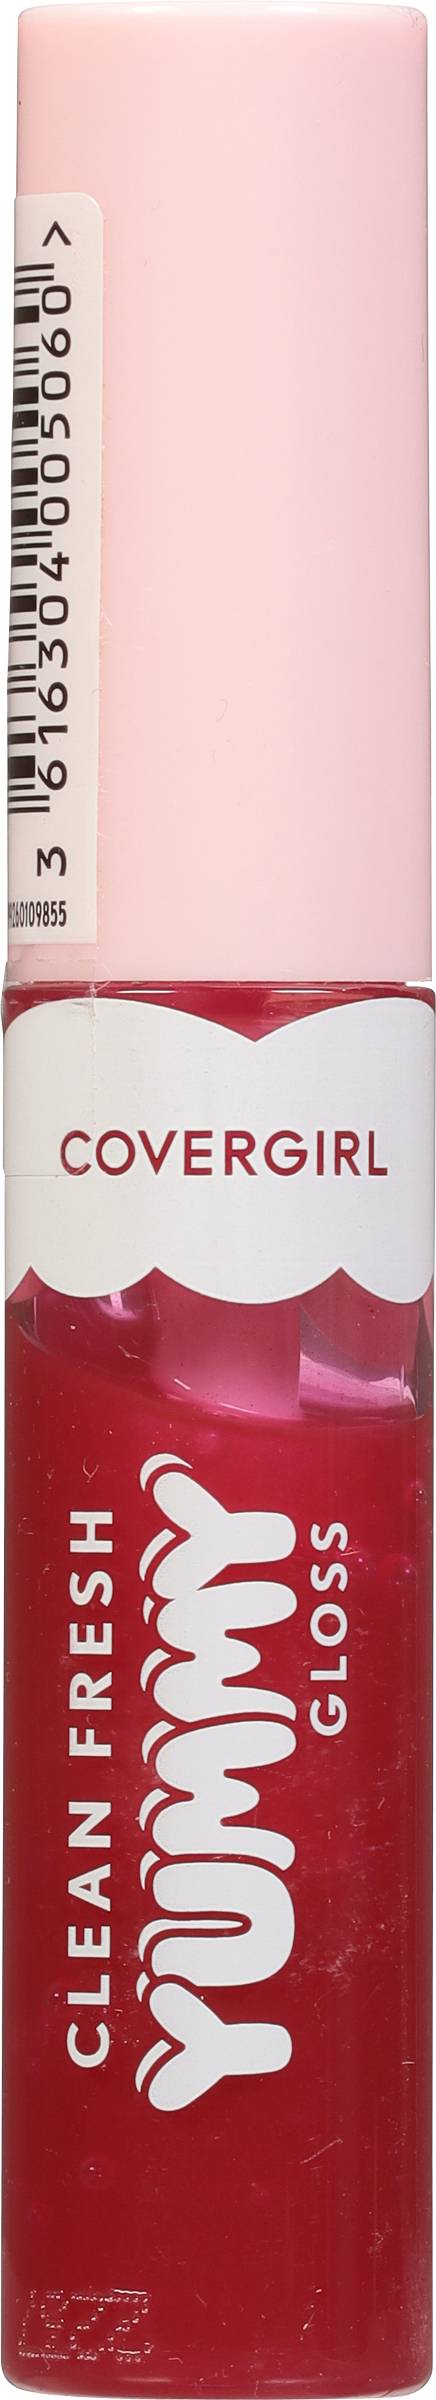 Covergirl Clean Fresh You're Just Jelly Yummy Lip Gloss (you're just jelly)